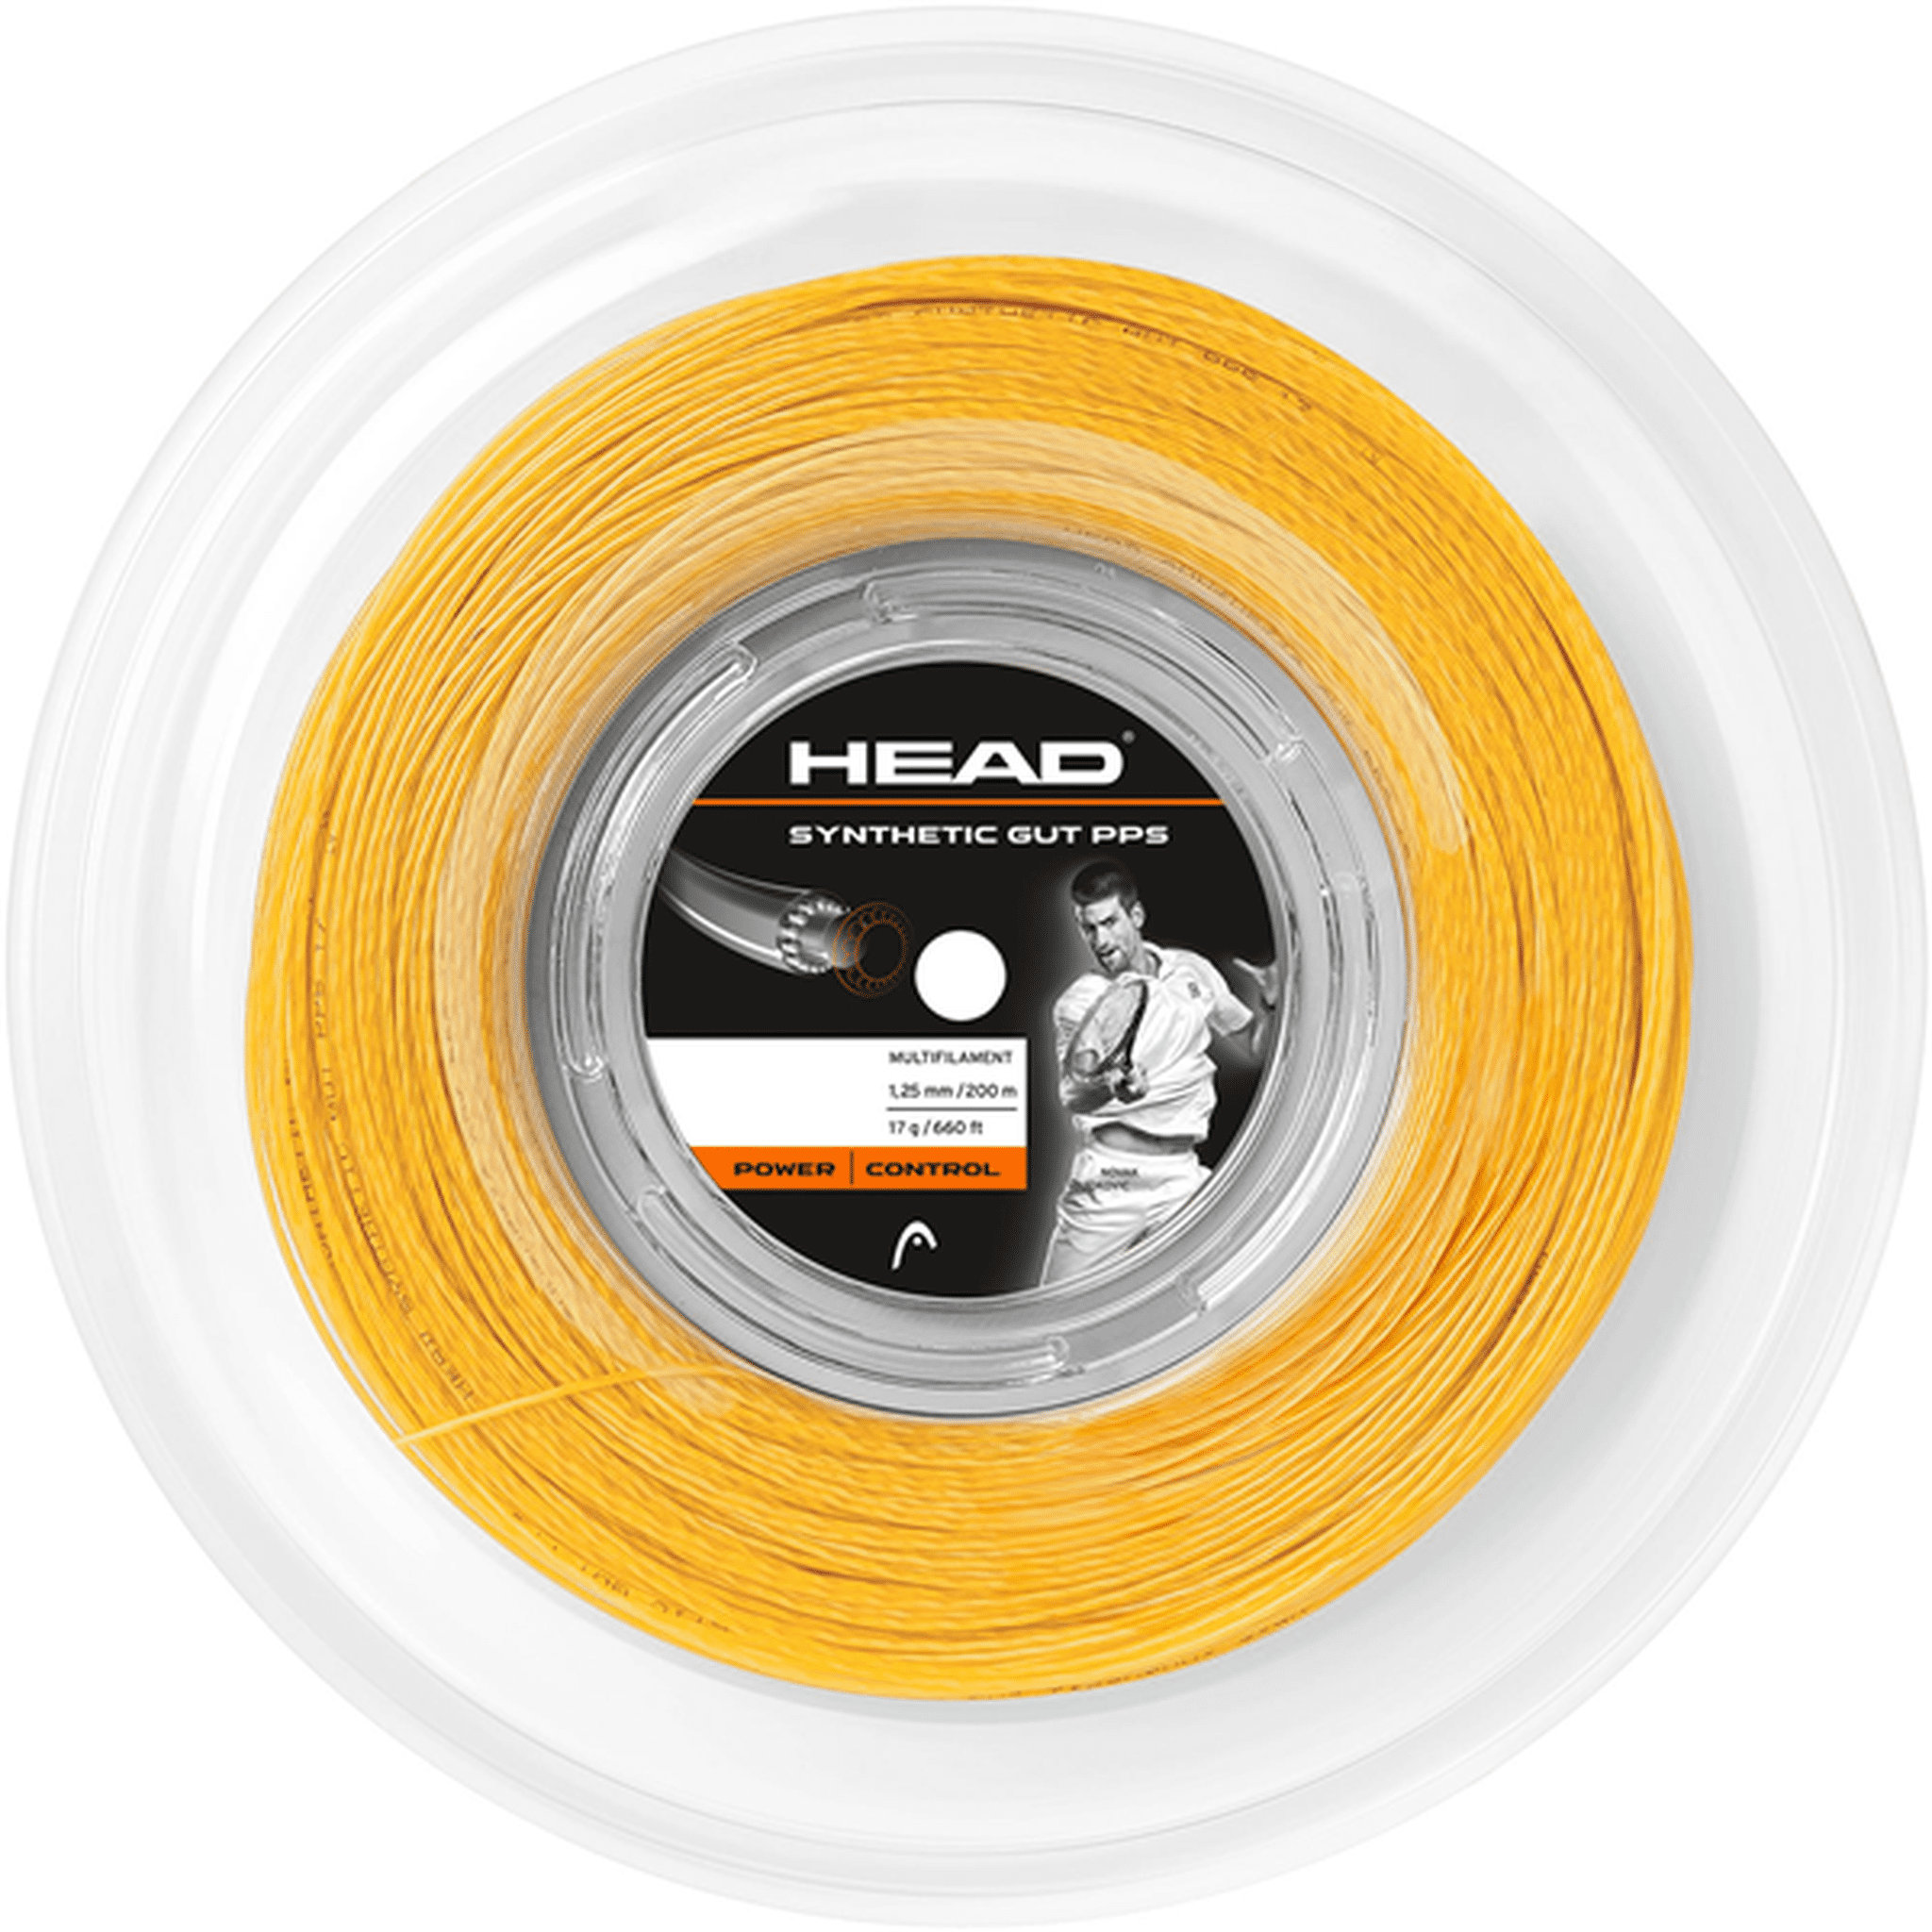 Head Synthetic Gut PPS Tennis String 200m Reel